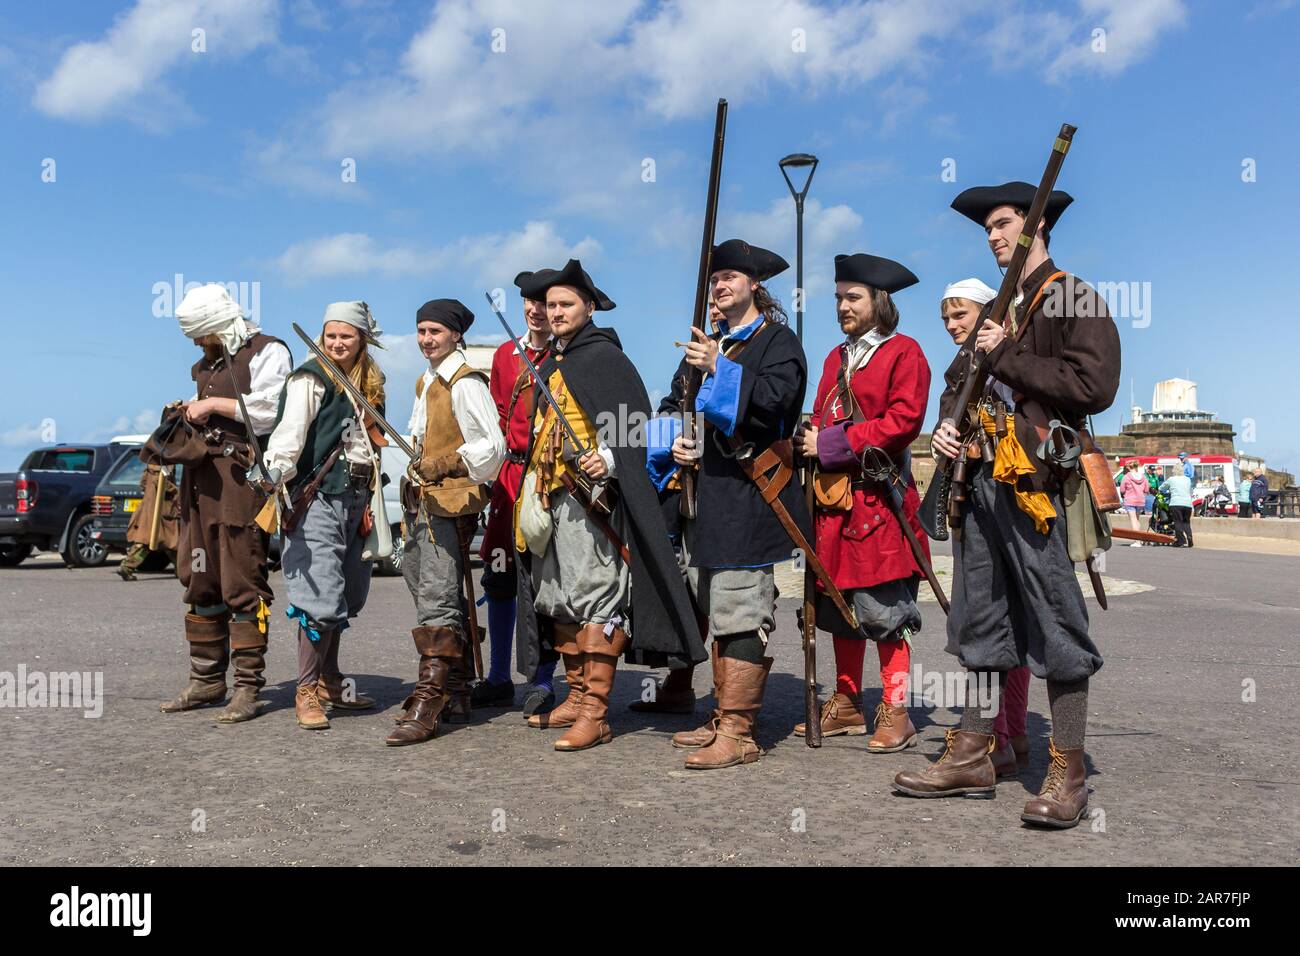 Re-enactors wearing pirate costumes at New Brighton Pirate festival 2019 Stock Photo